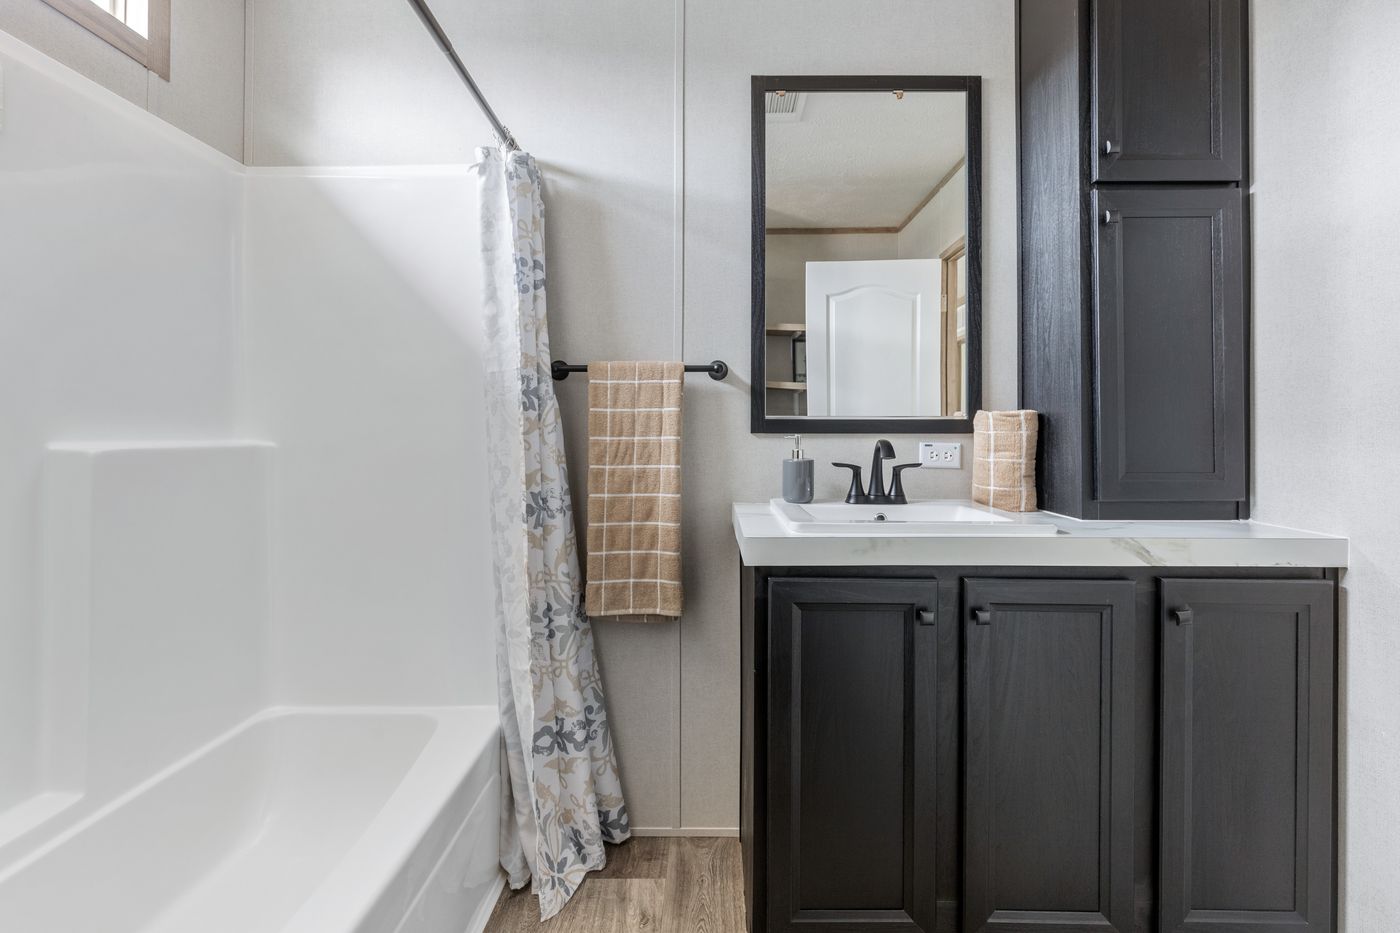 The STERLING XL ANNIVERSARY Guest Bathroom. This Manufactured Mobile Home features 3 bedrooms and 2 baths.